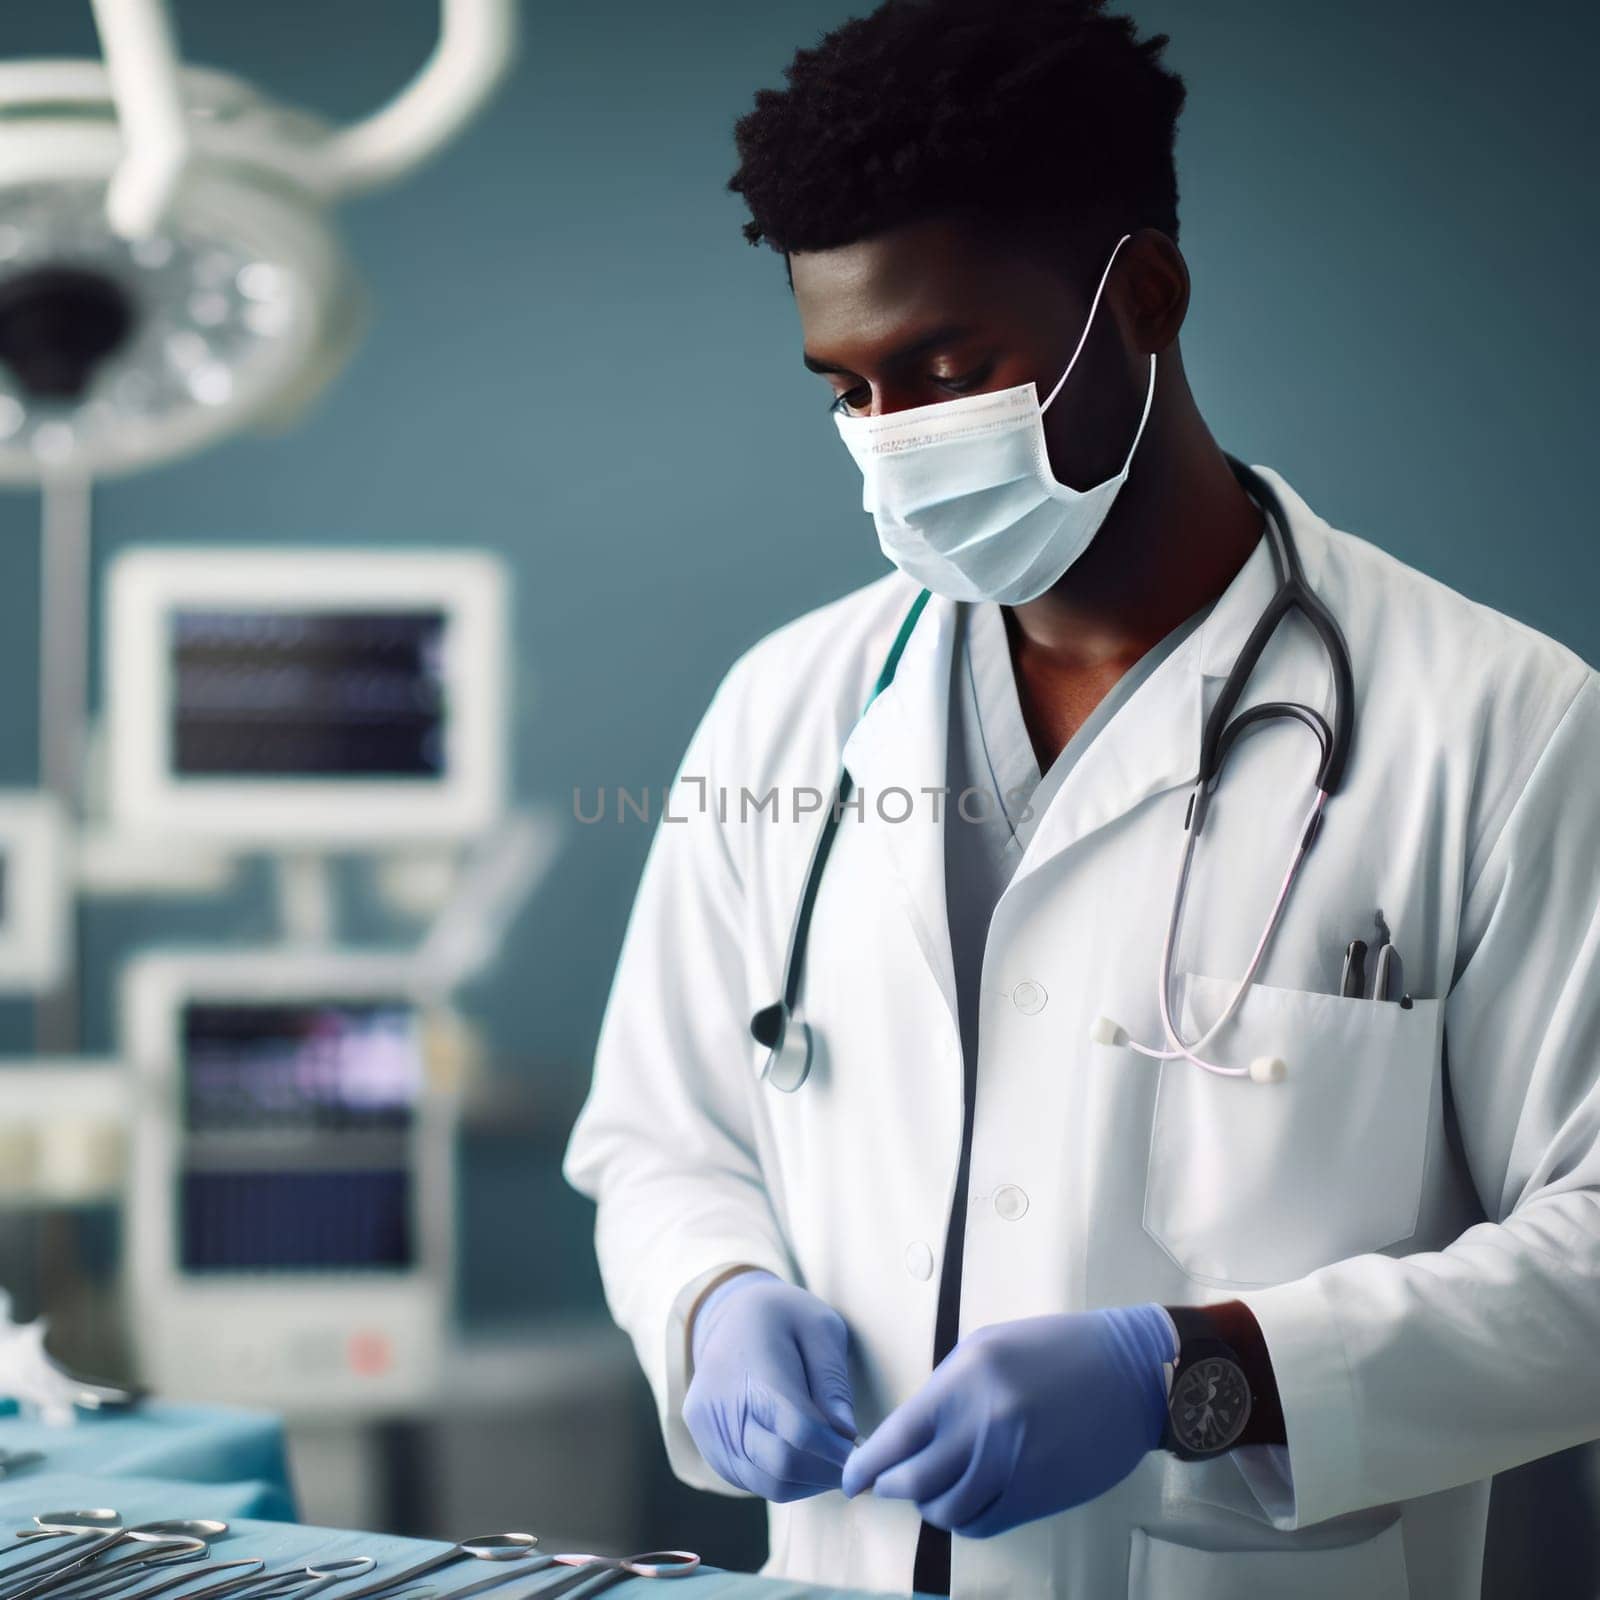 African american doctor in hospital operating room, wearing white coat, stethoscope, and blue gloves